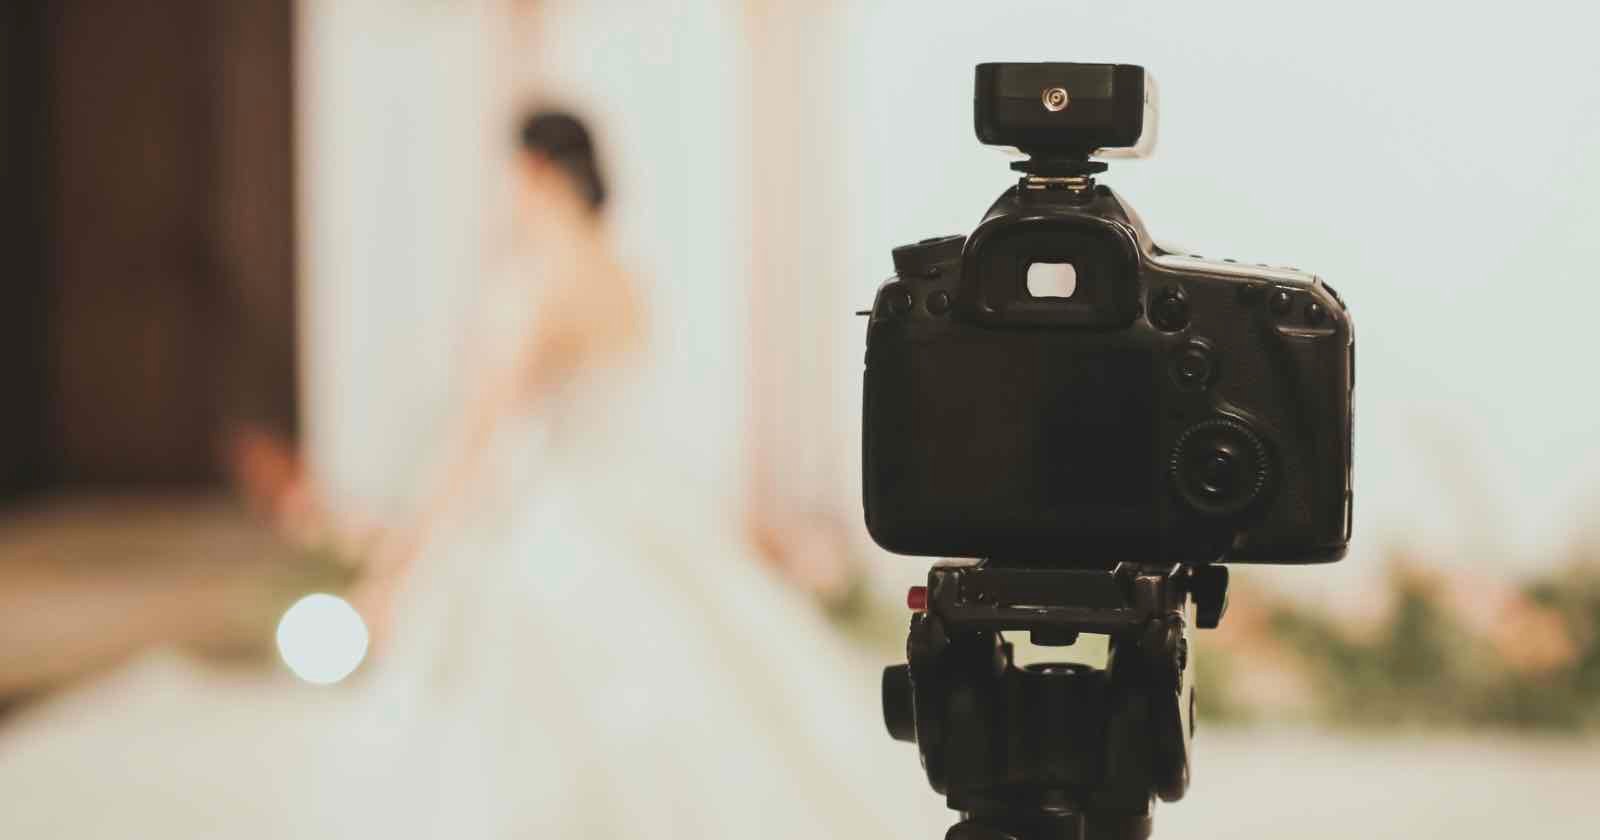  wedding photographer apologizes not delivering couples photos 